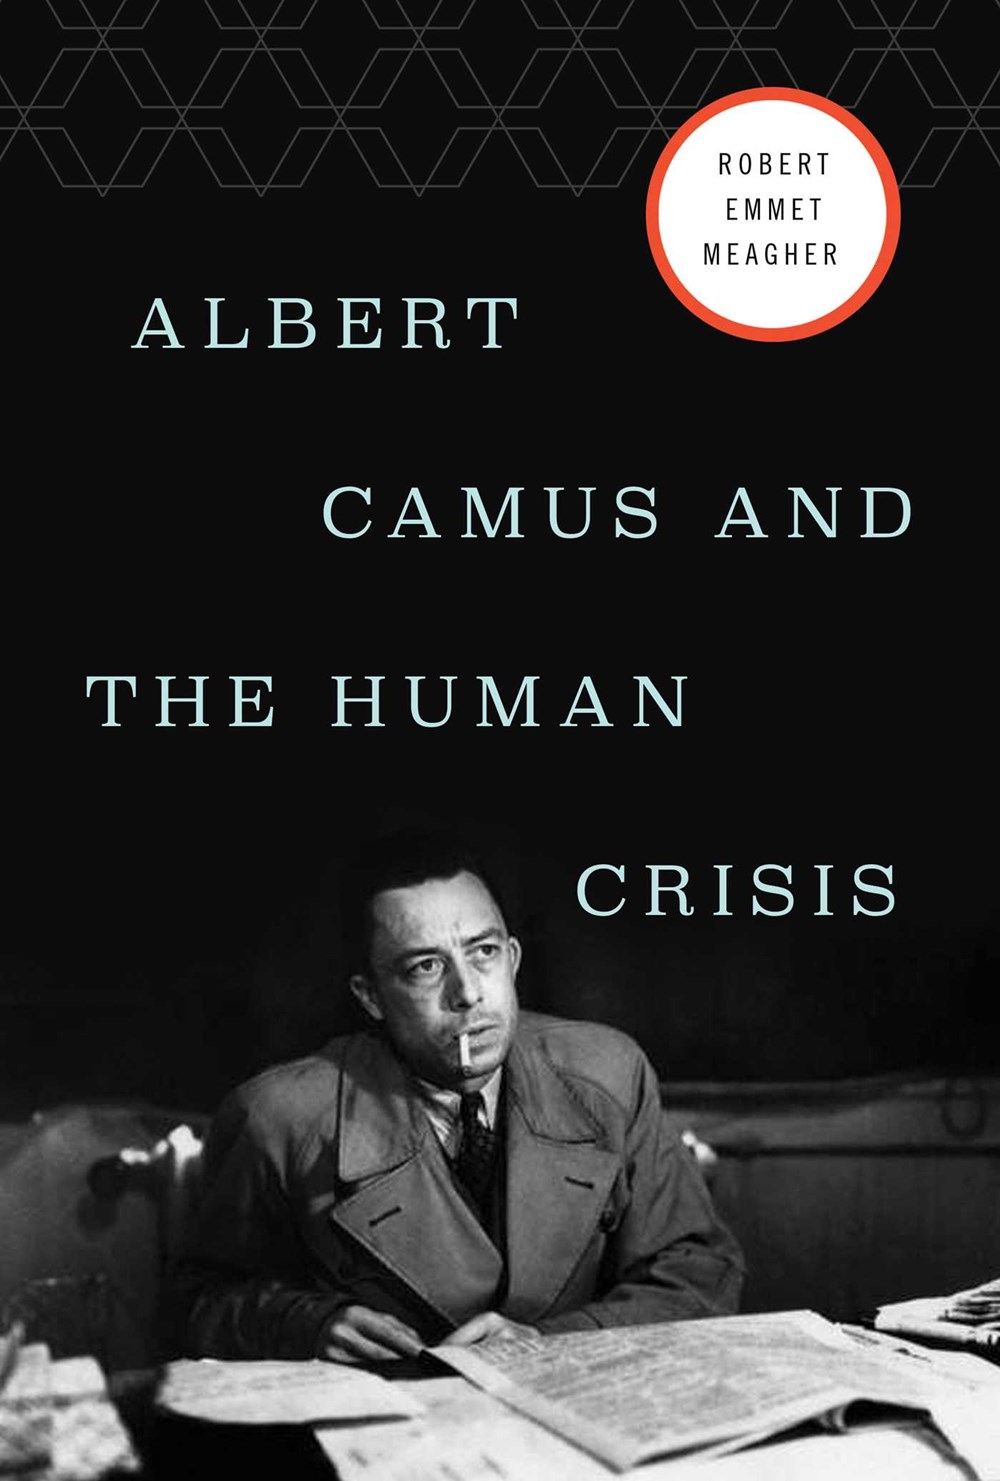 The cover of Robert Emmet Meagher's *Albert Camus and the Human Crisis